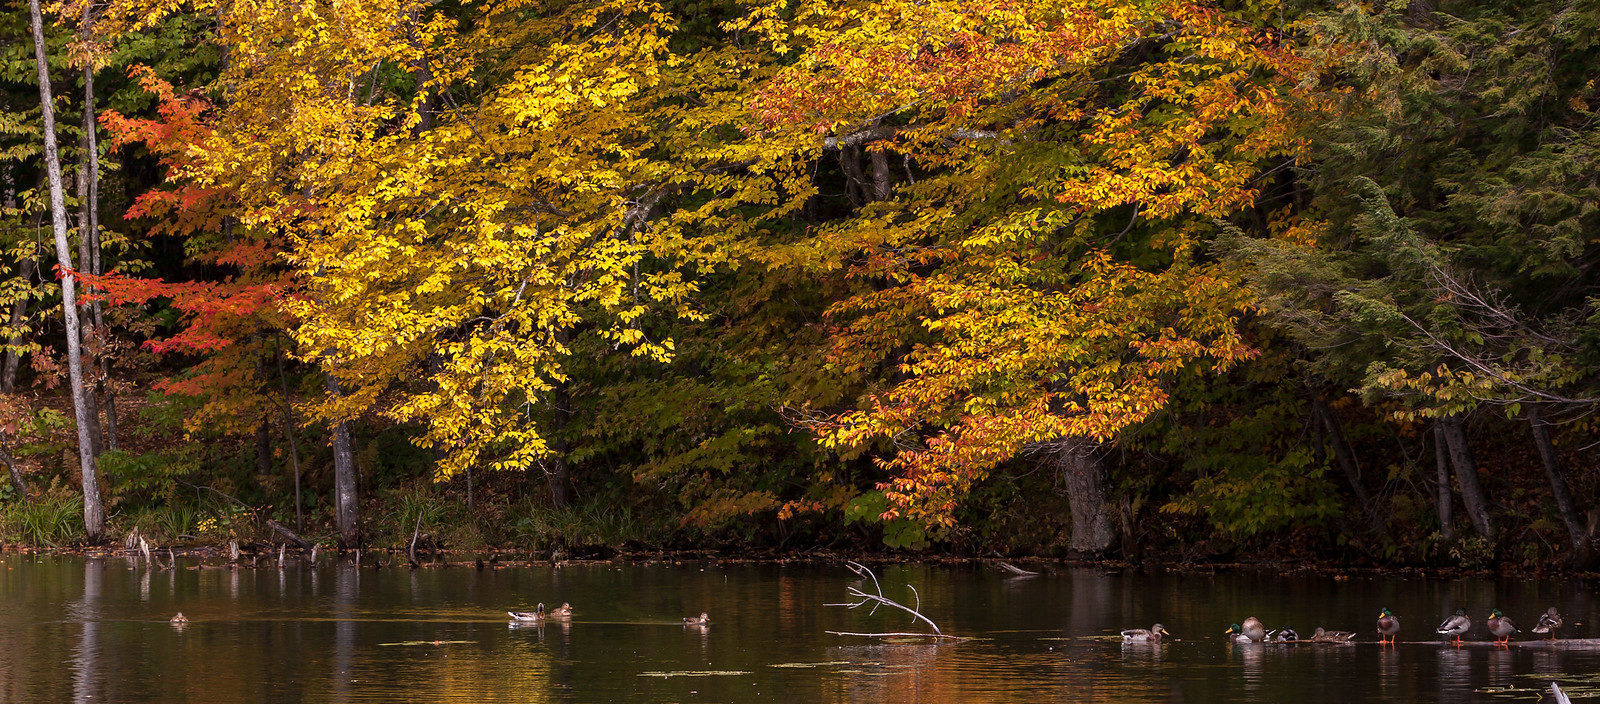 Mallard ducks on a pond with colorful fall leaves in the background